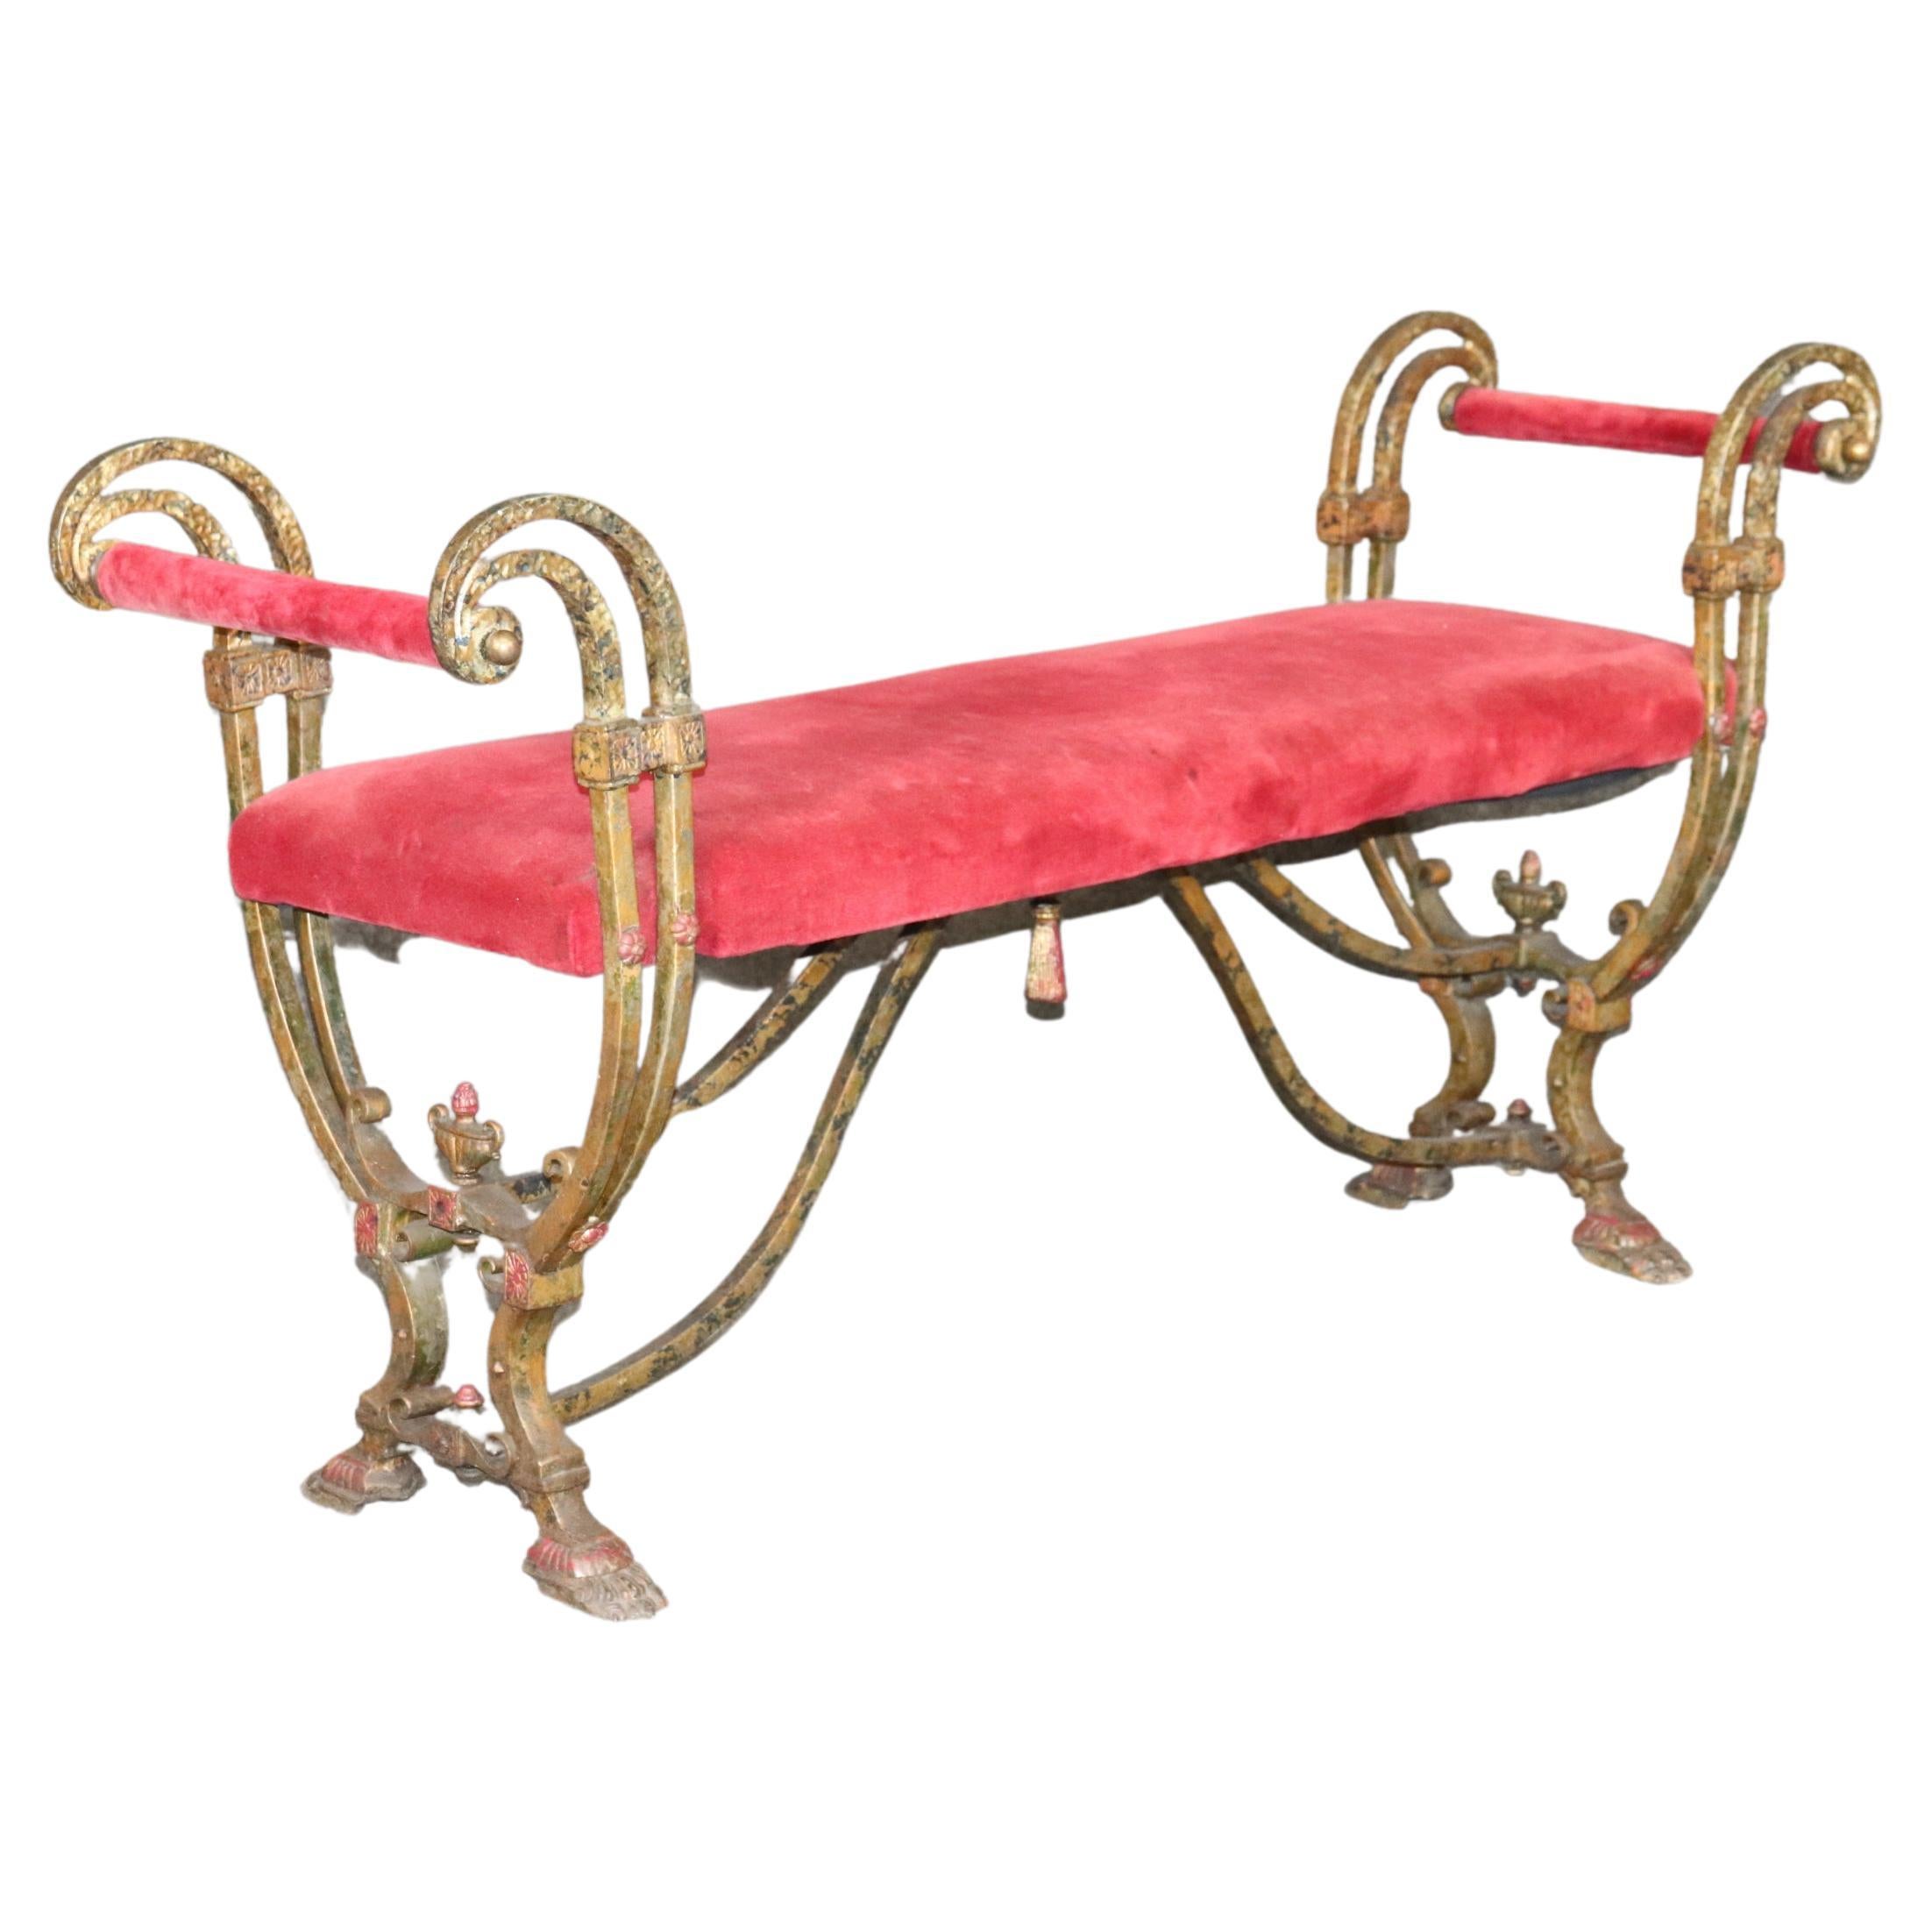 Oscar Bach Style Hand-Wrought Iron Upholstering Window Bench circa 1930